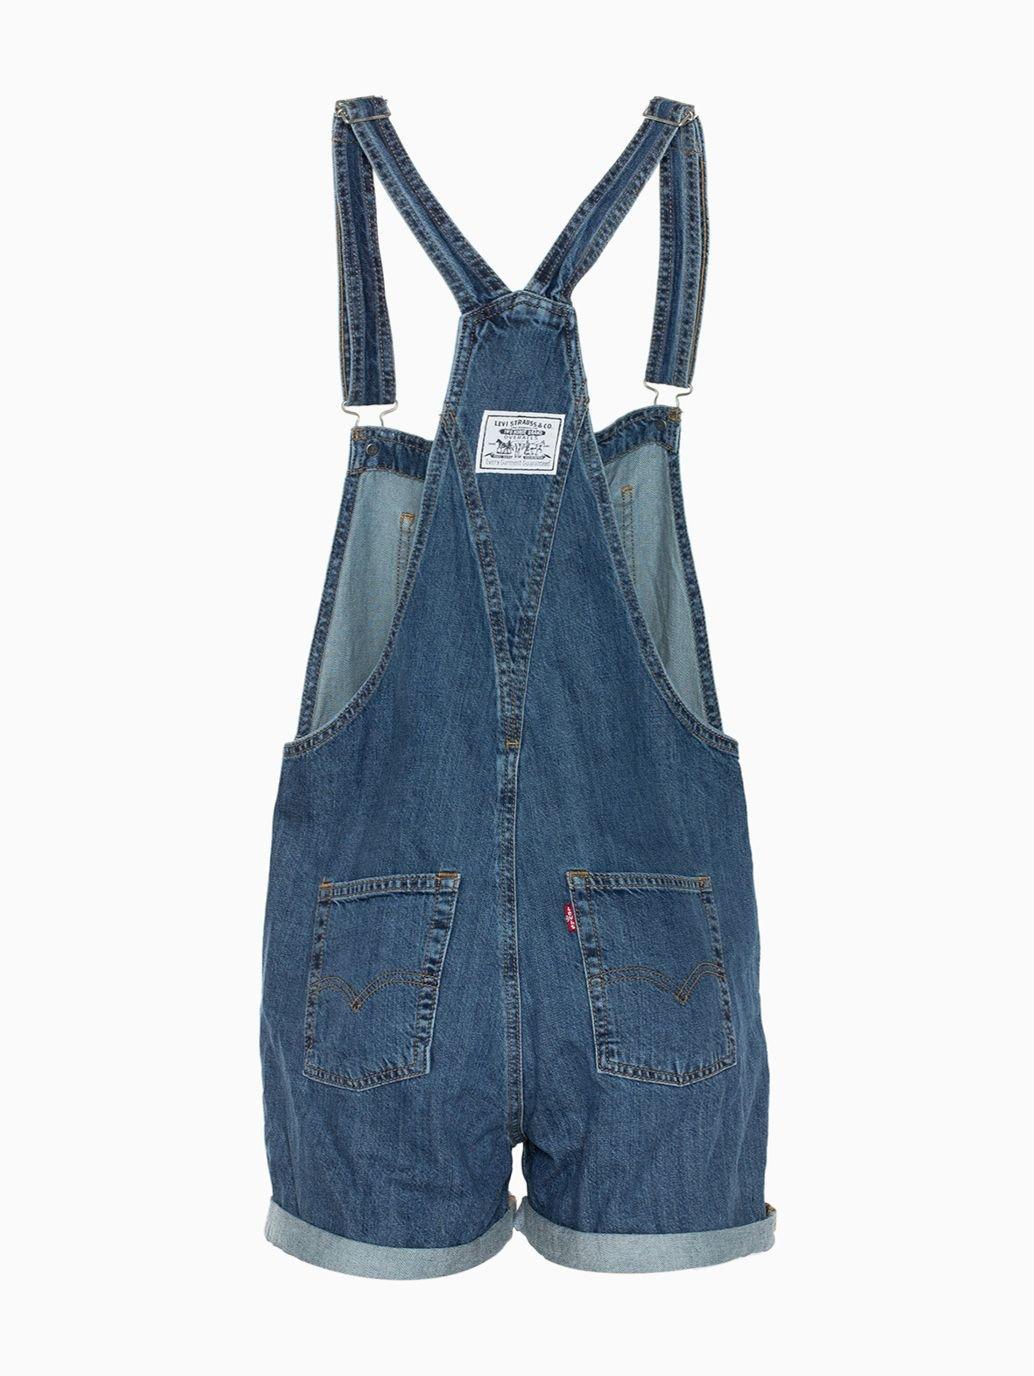 levis malaysia Vintage Shortall 523330003 15 Details